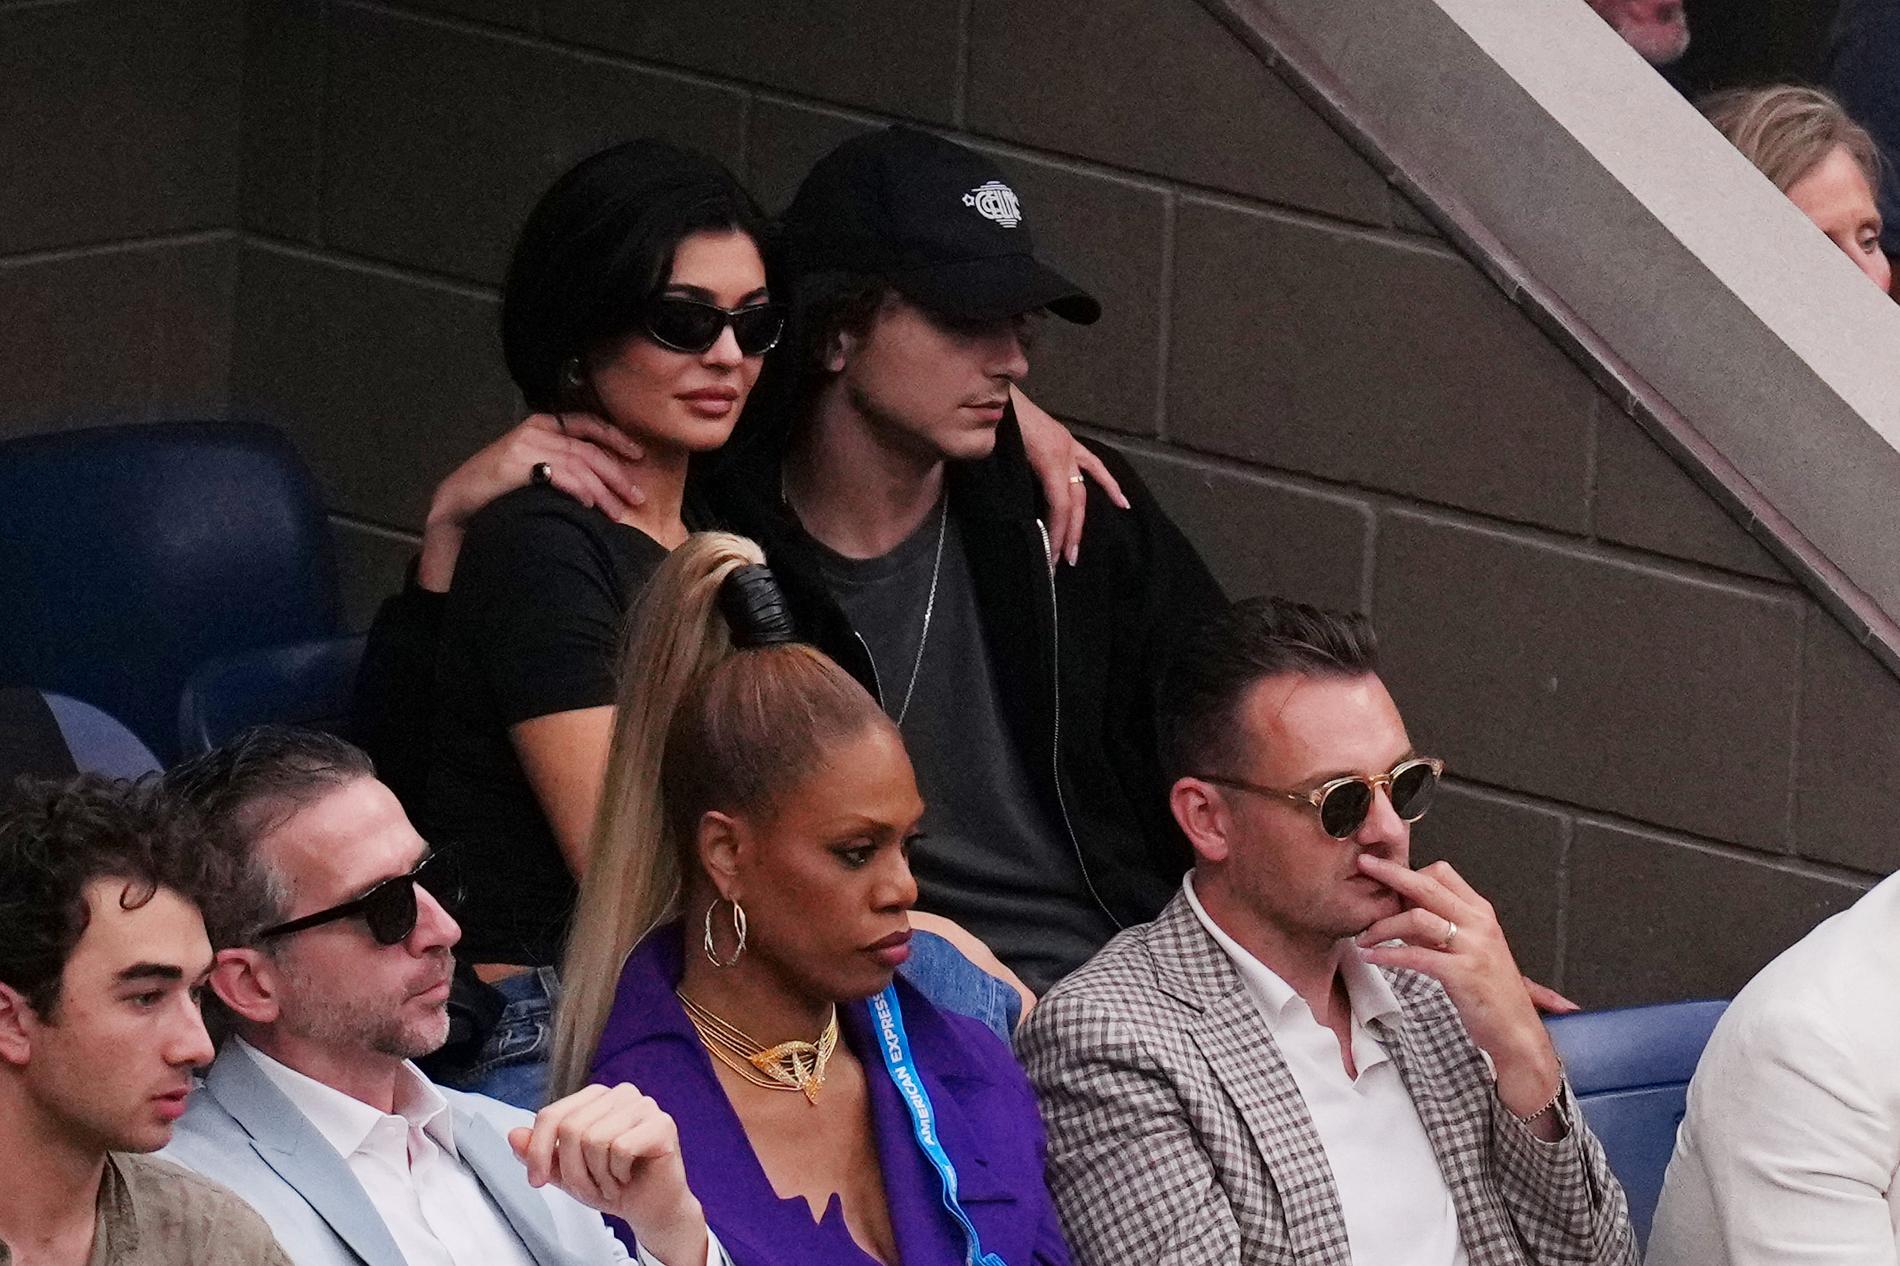 On stage: Kylie Jenner and Timothée Chalamet during the US Open tennis tournament in New York in September 2023.